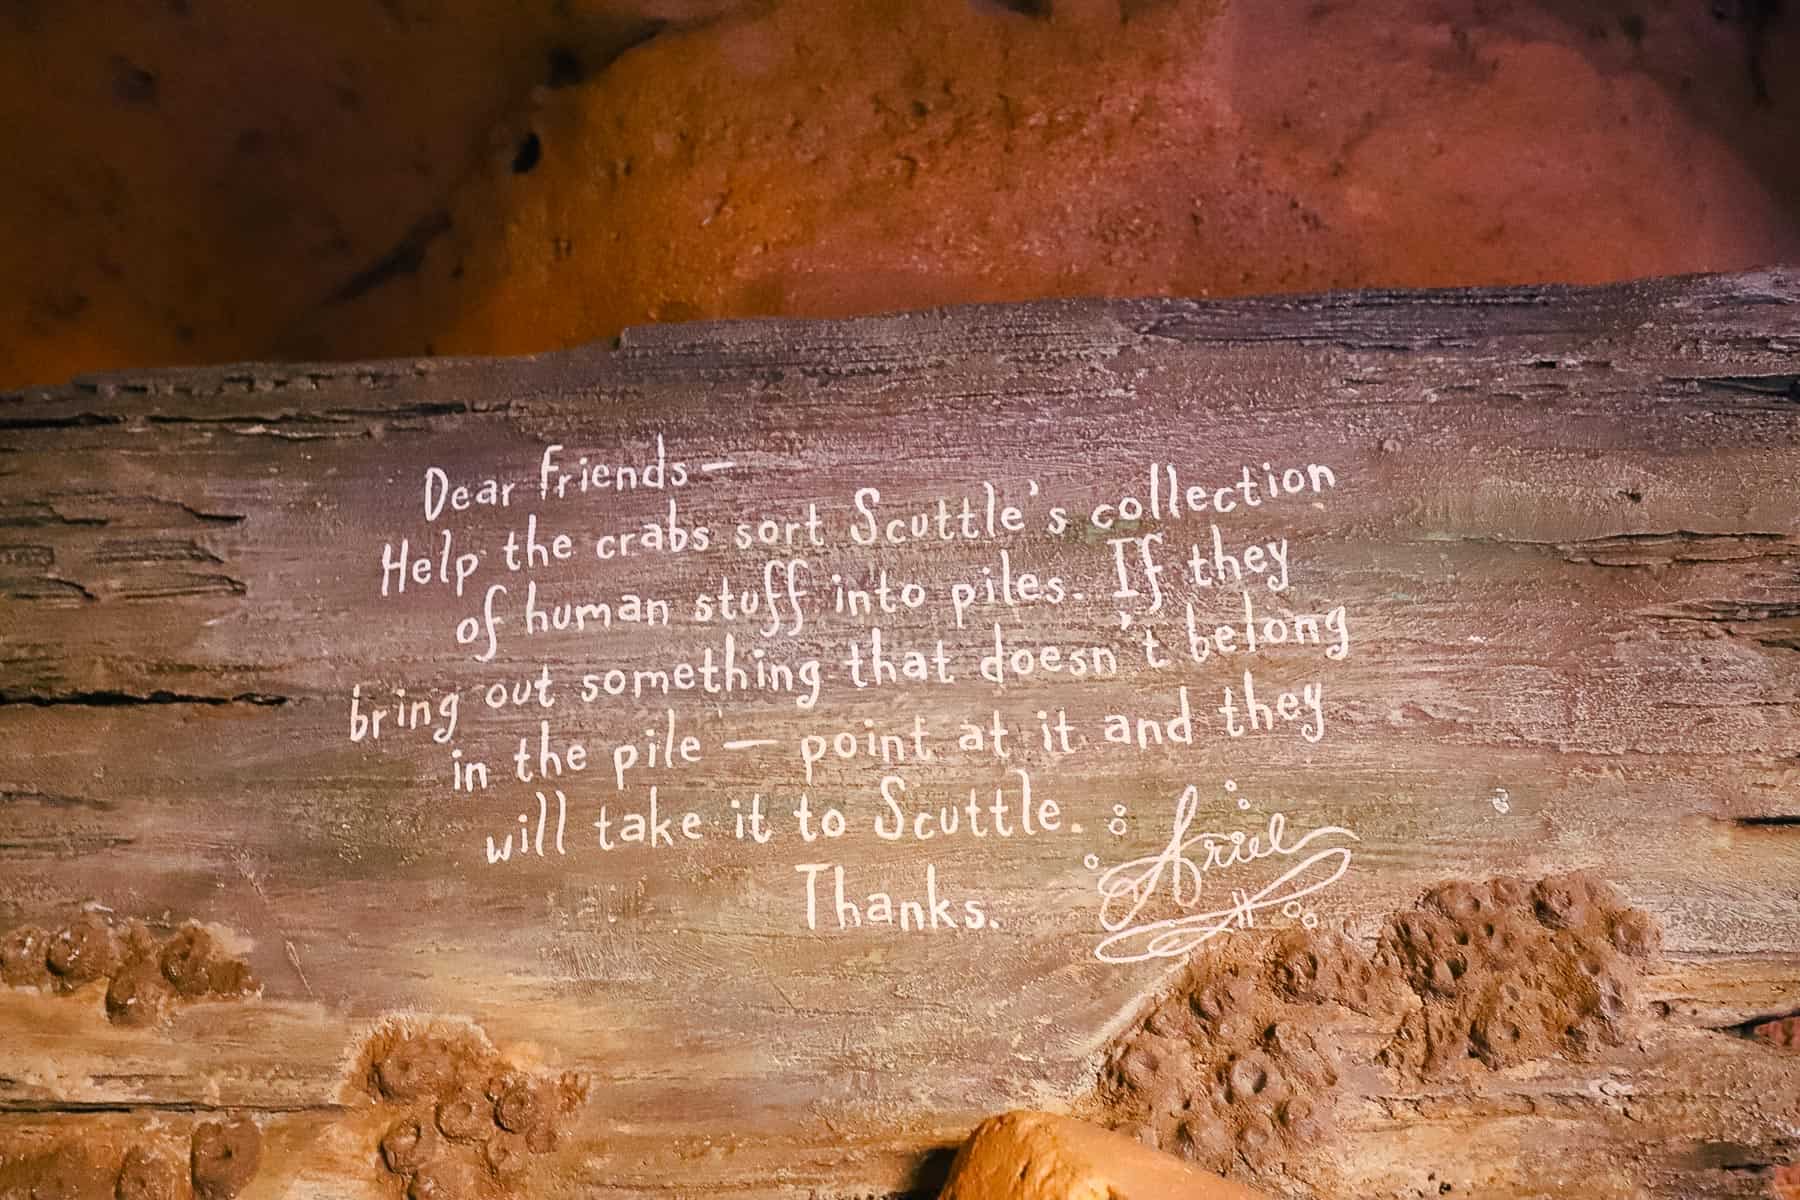 Interactive queue sign reads, "Dear Friends, Help the crabs sort Scuttle's collection of human stuff into piles. If they bring out something that doesn't belong in the pile, point at it and they will take it to Scuttle. Thanks, Ariel 